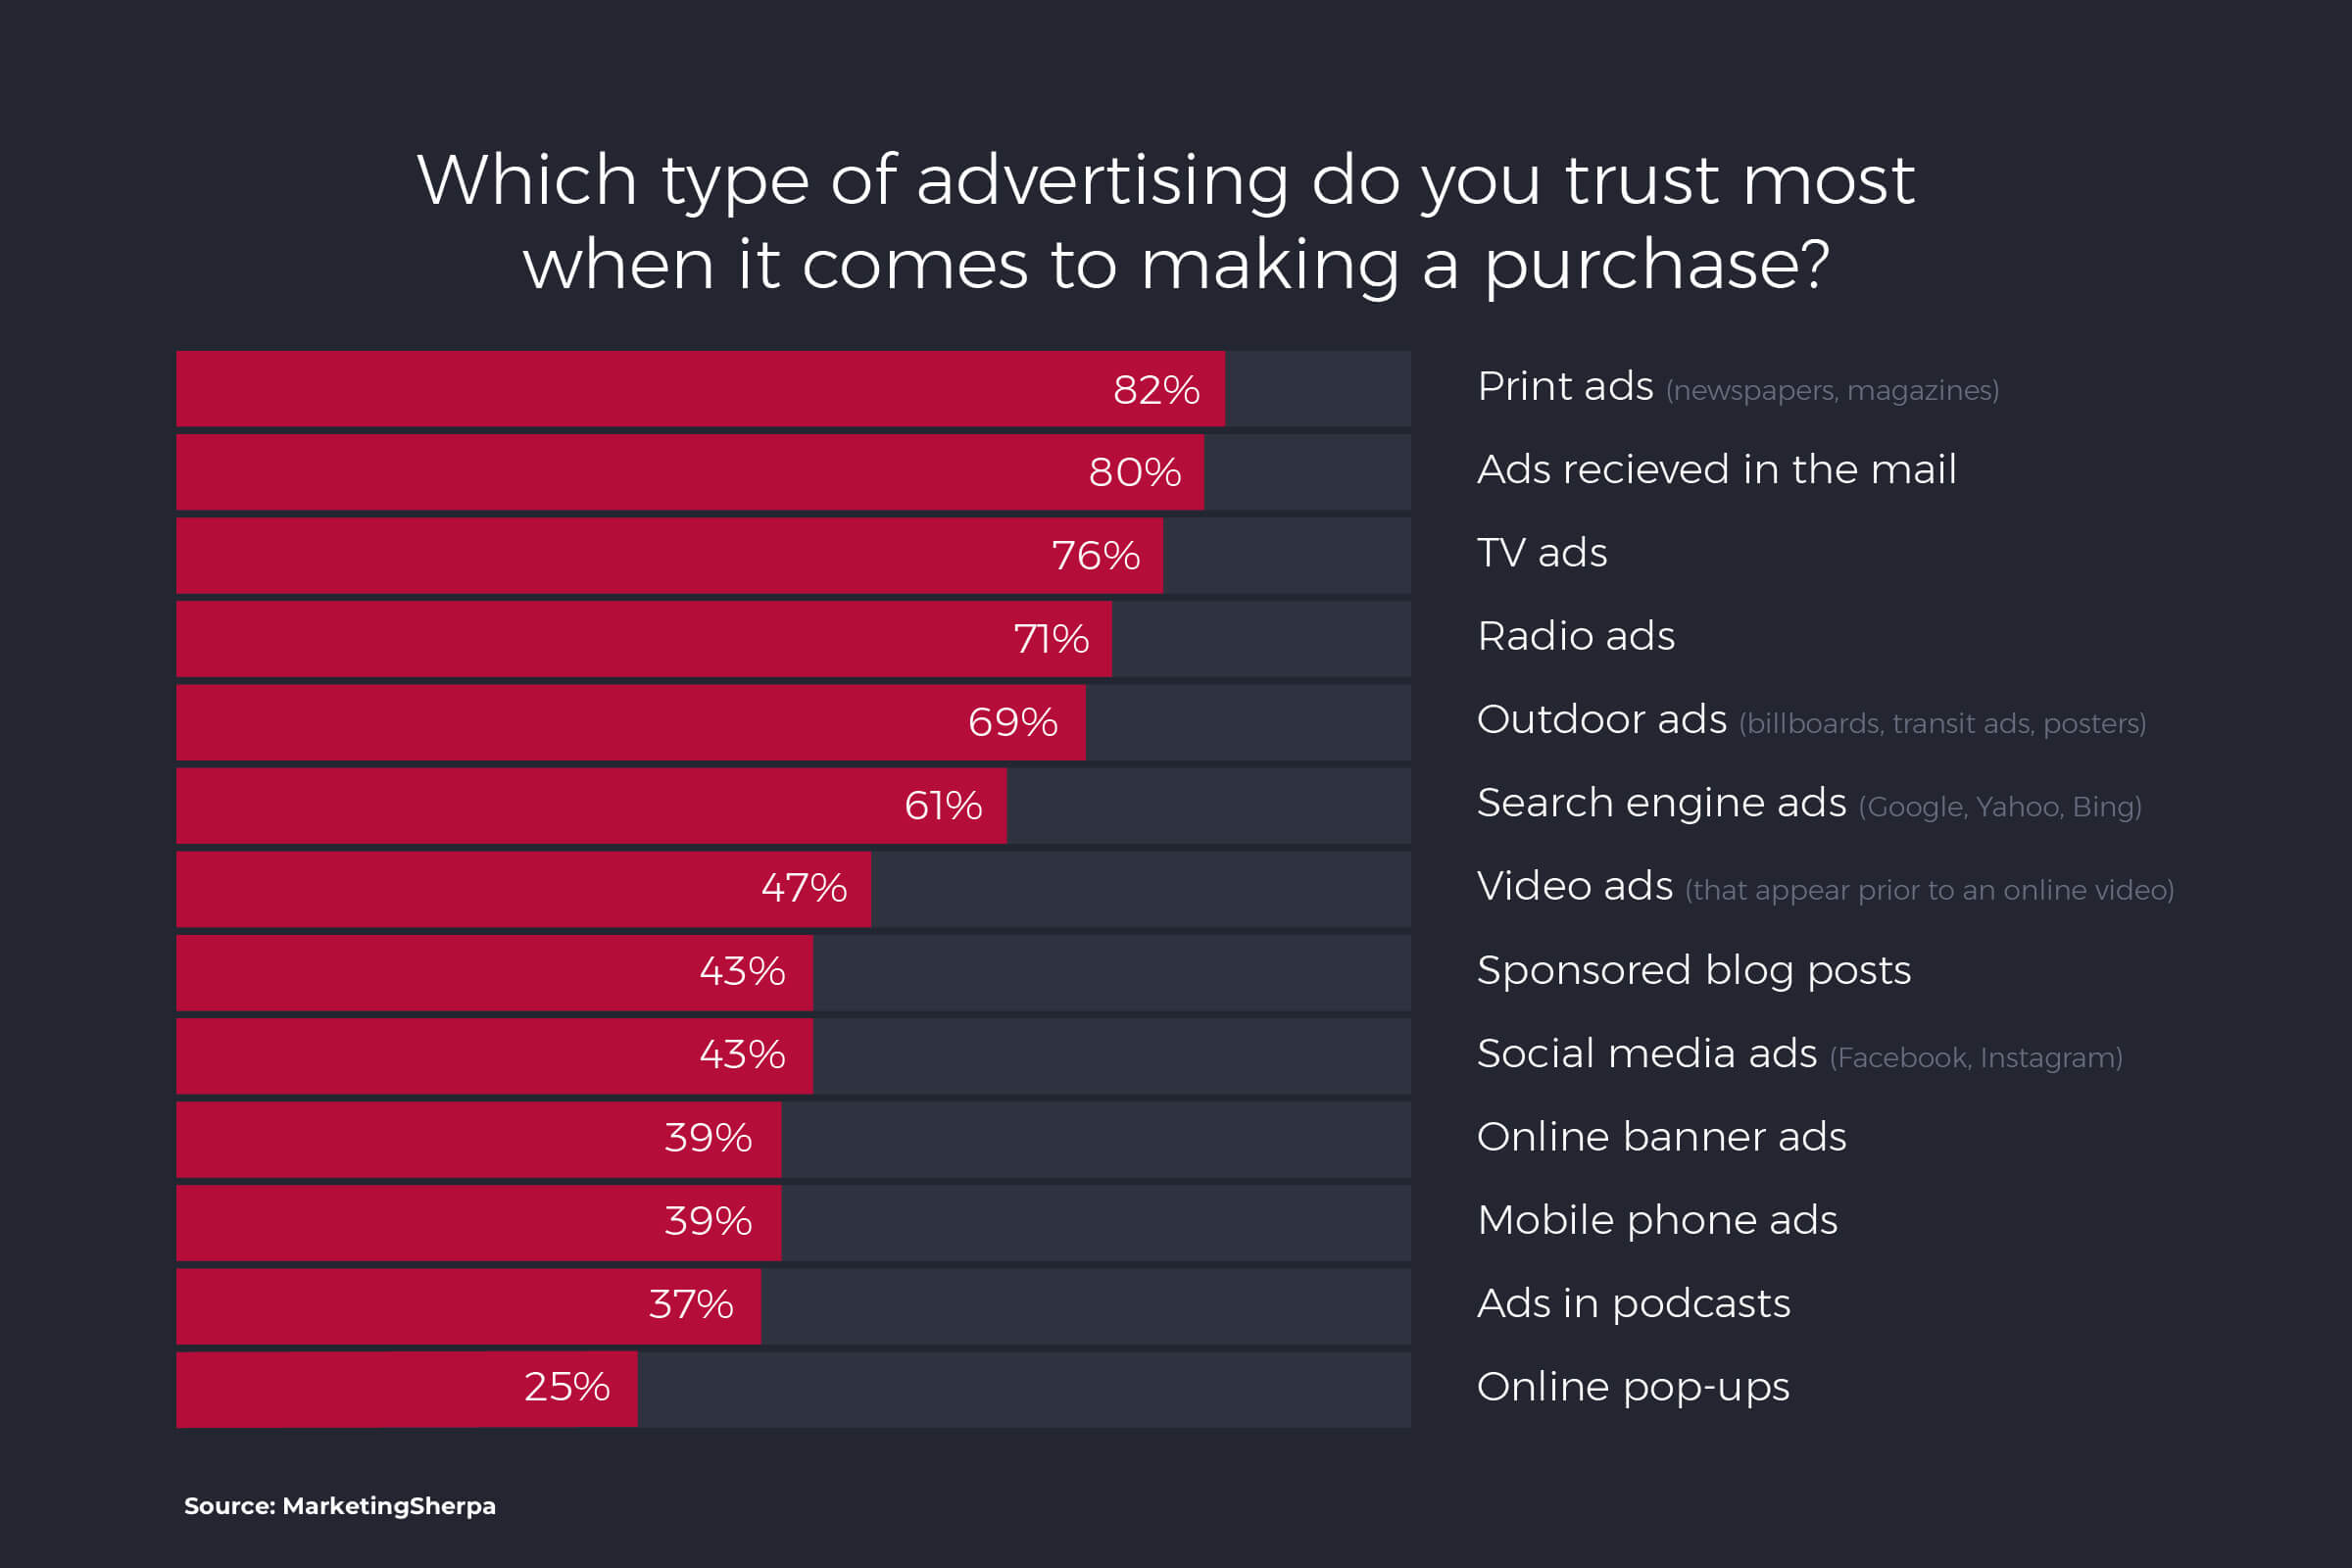 types of advertising trusted most